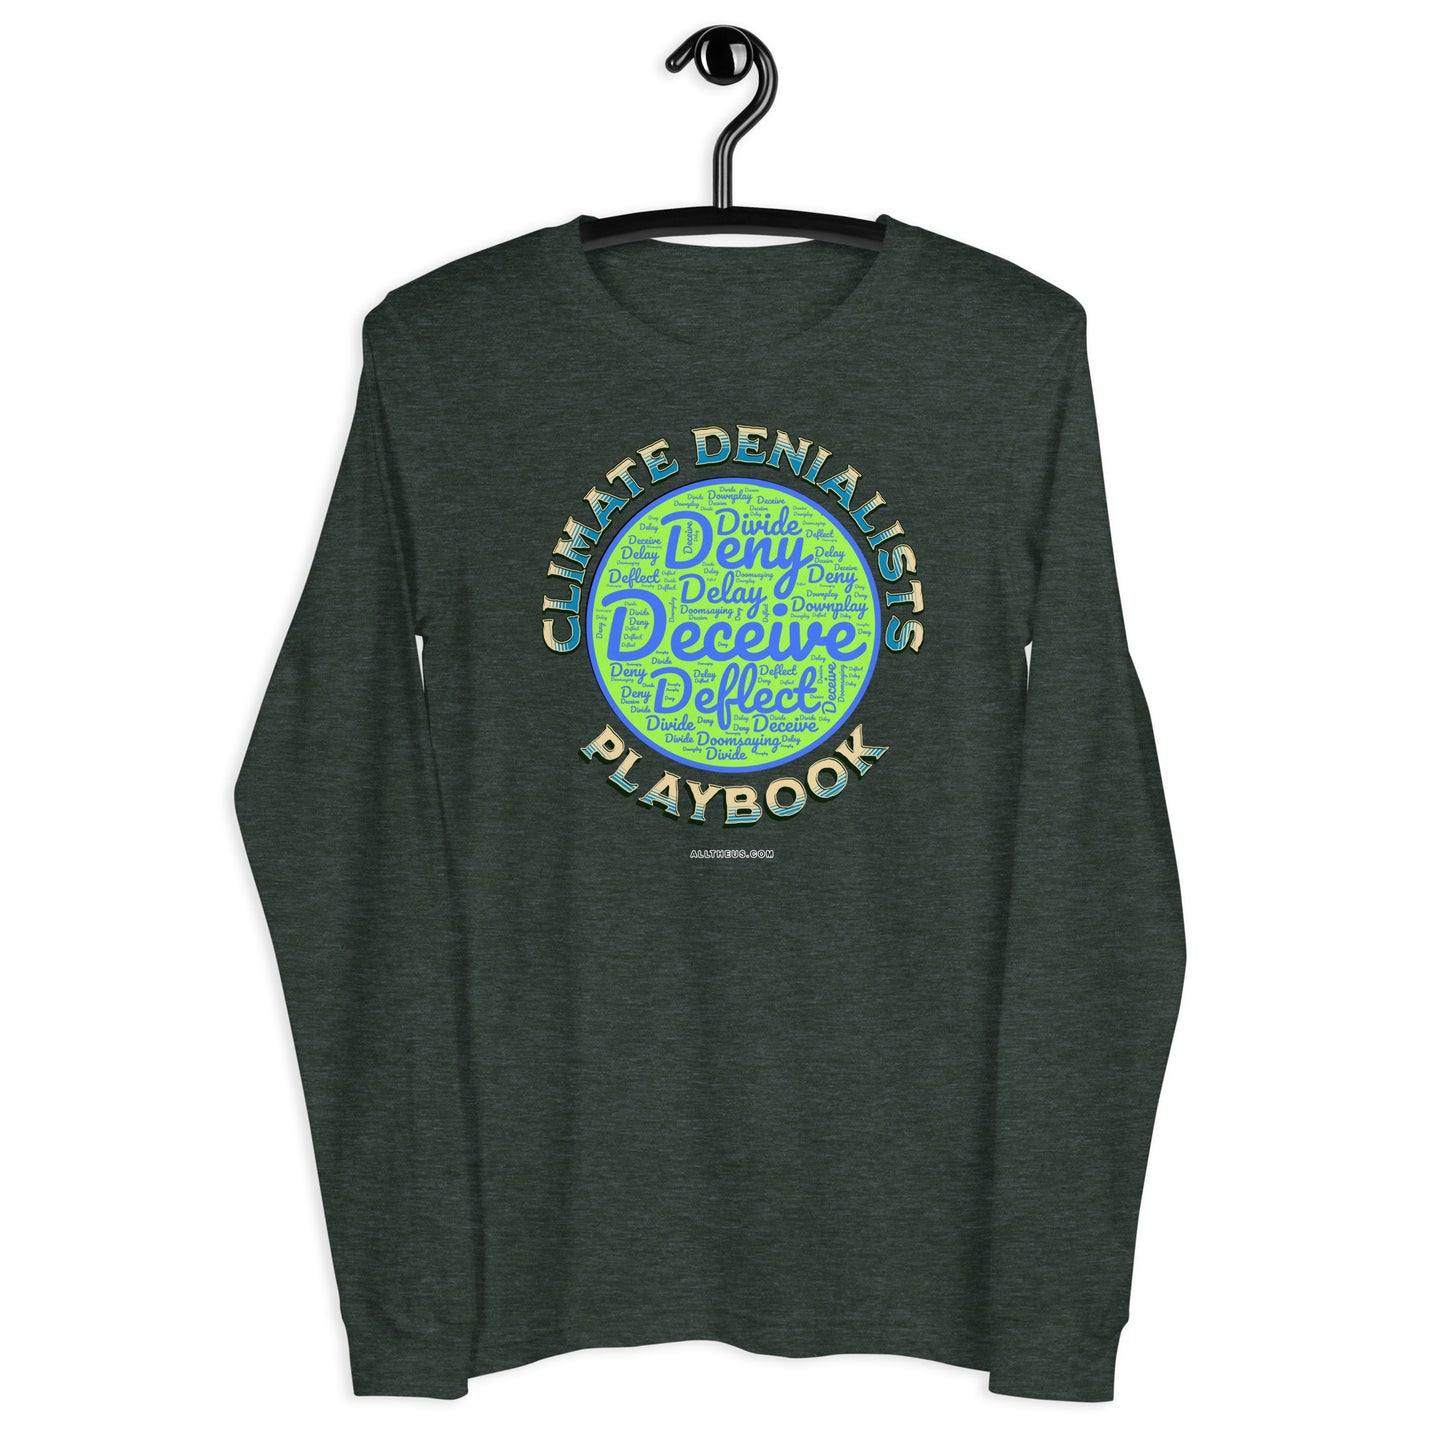 Unisex Long Sleeve Tee - Be Wild About The Climate Change Denialists Playbook